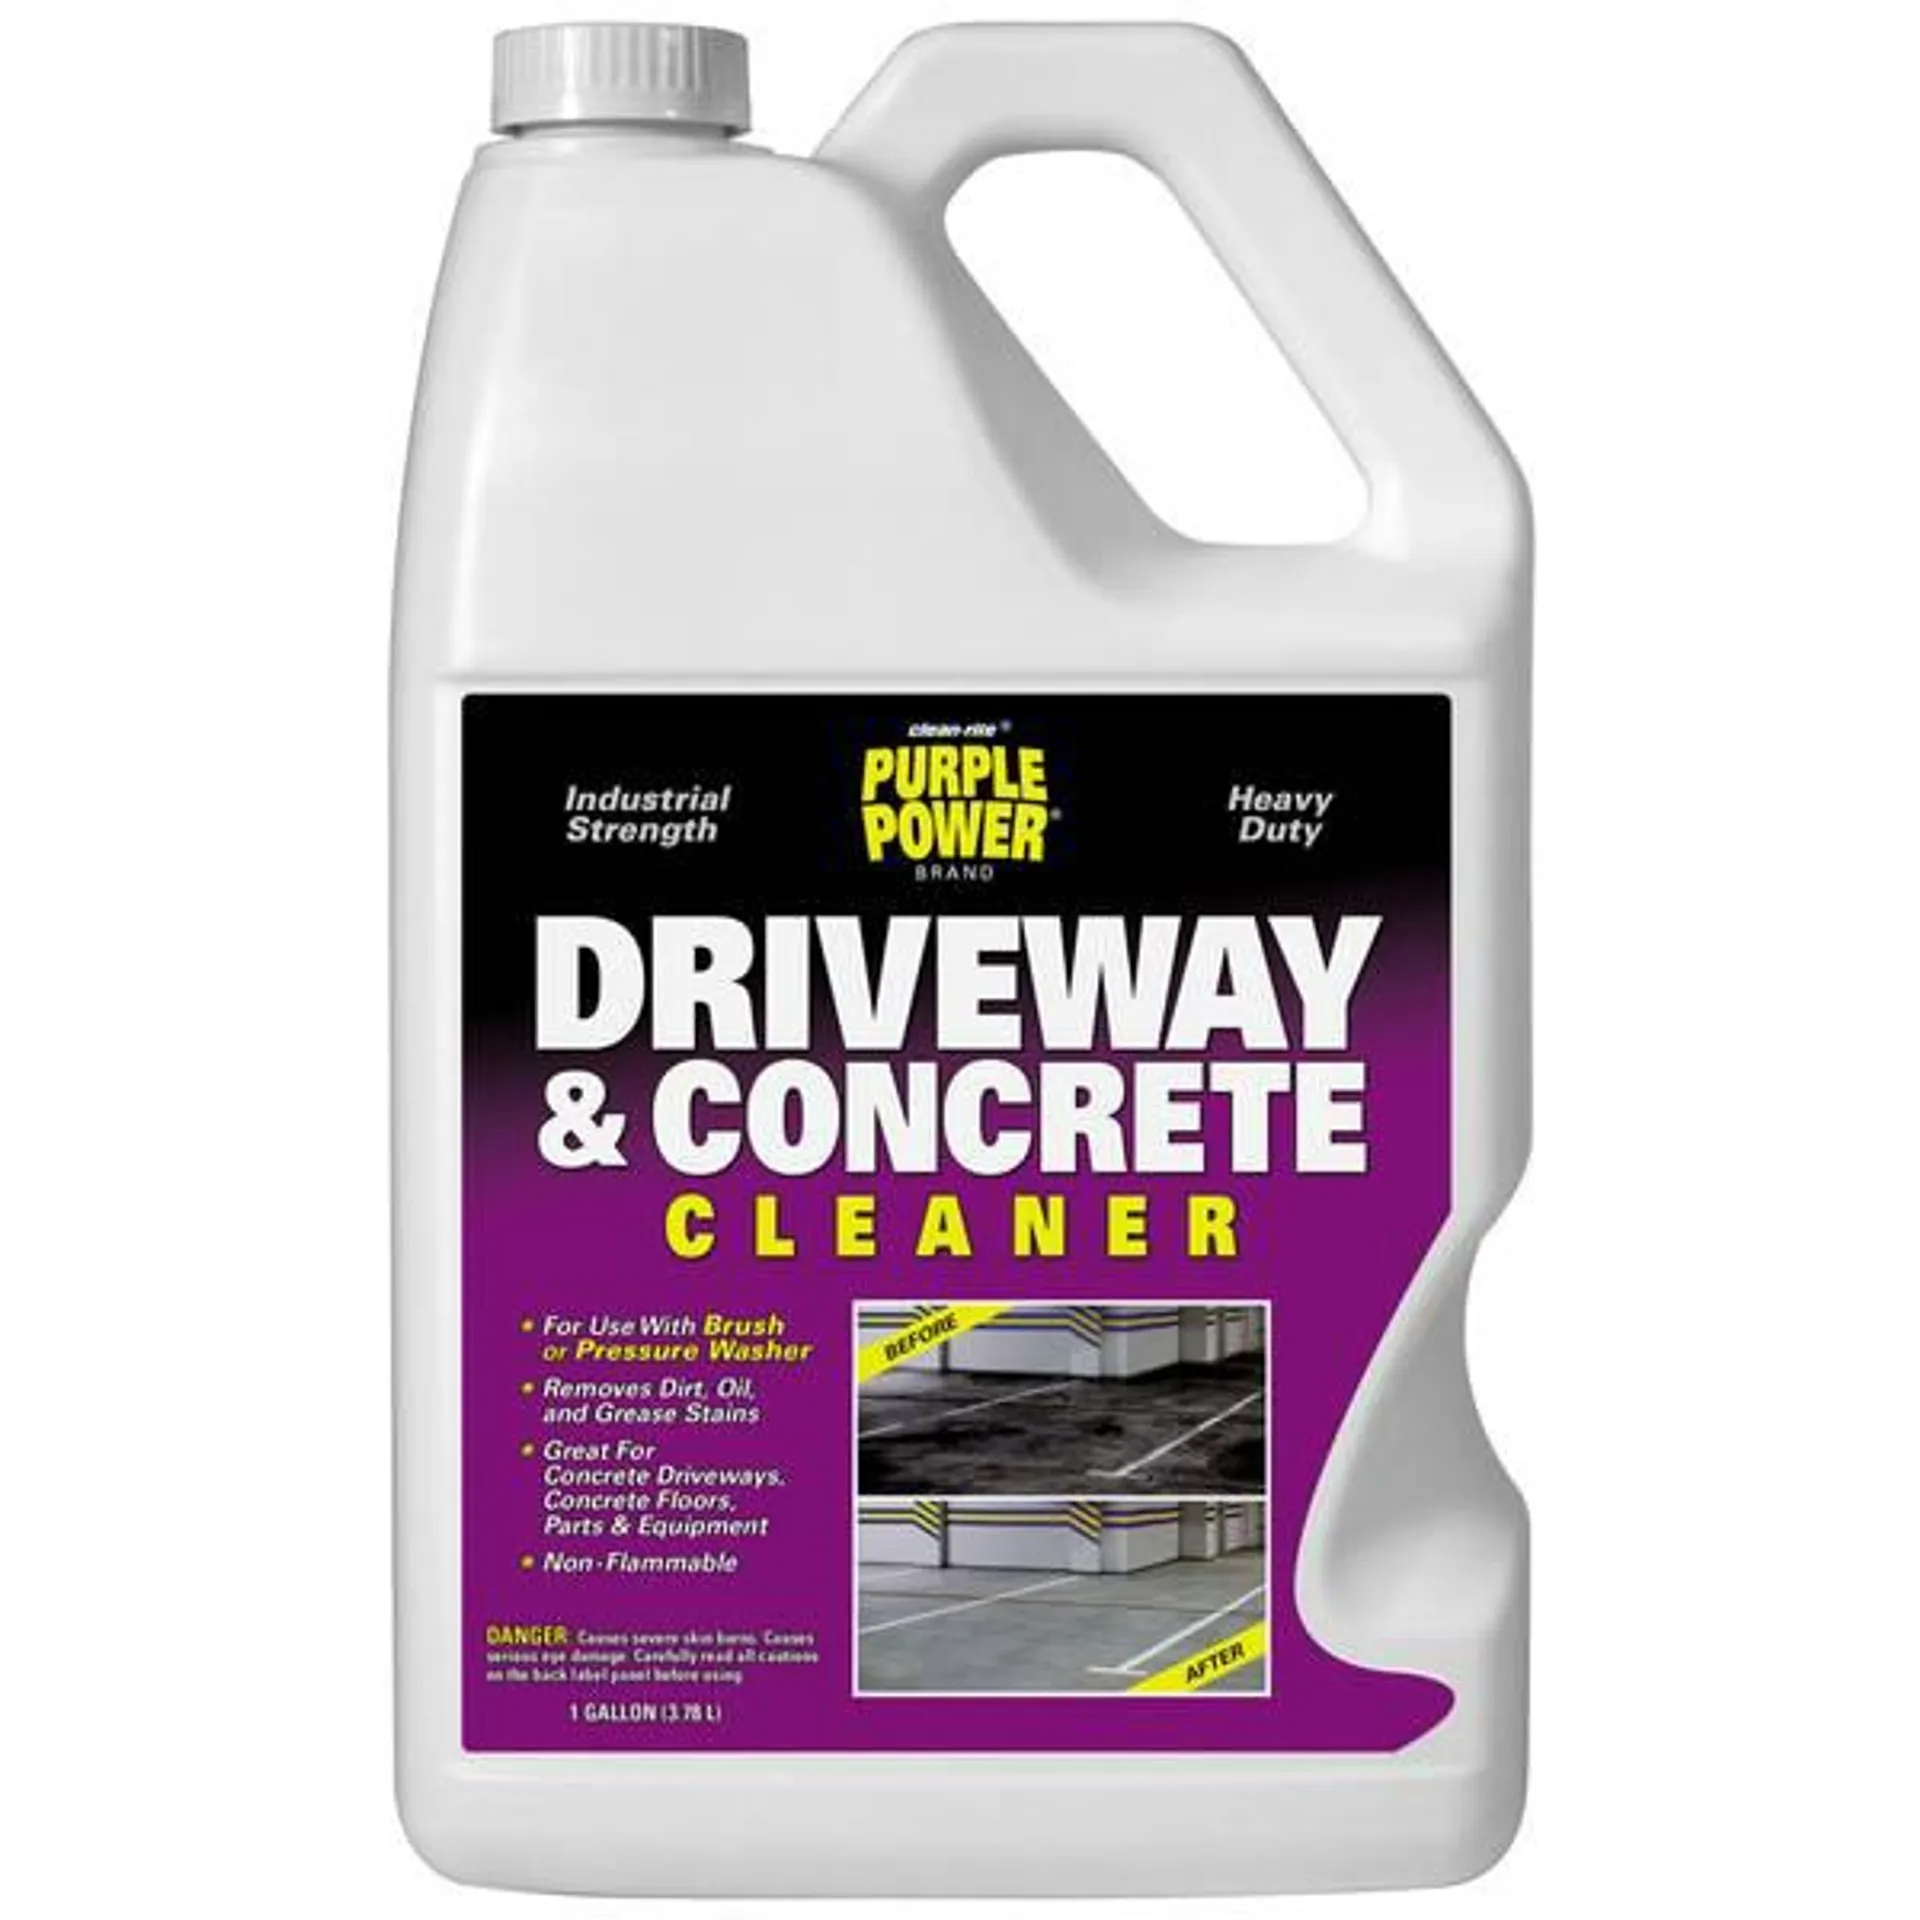 Driveway and Concrete Cleaner